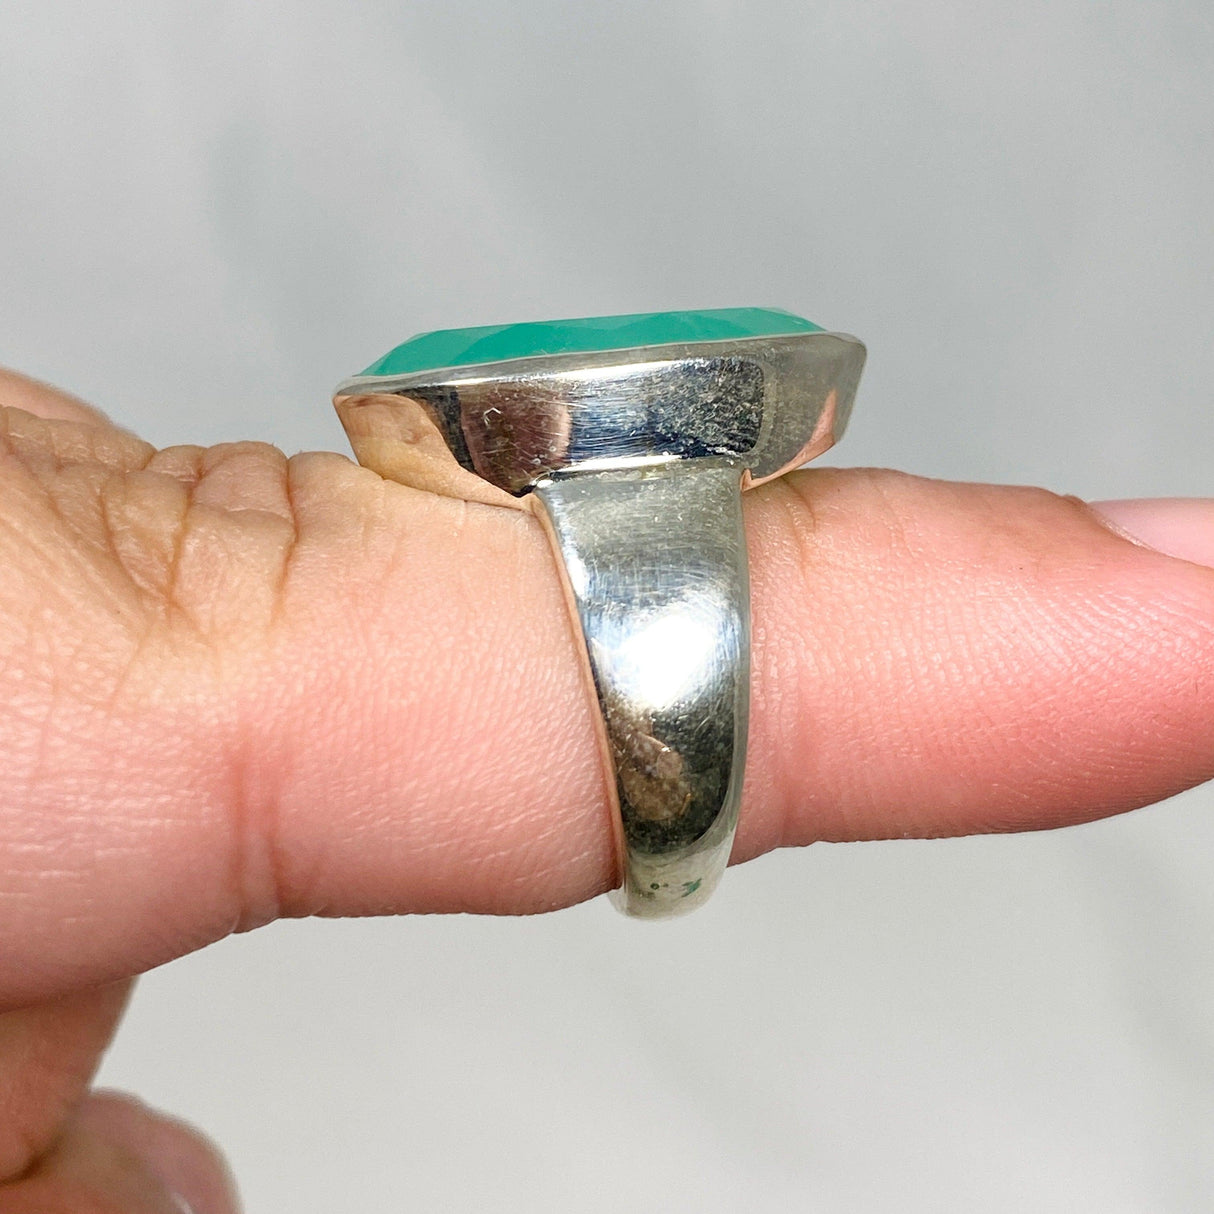 Chrysoprase Faceted Oval Ring Size 6.5 PRGJ470 - Nature's Magick